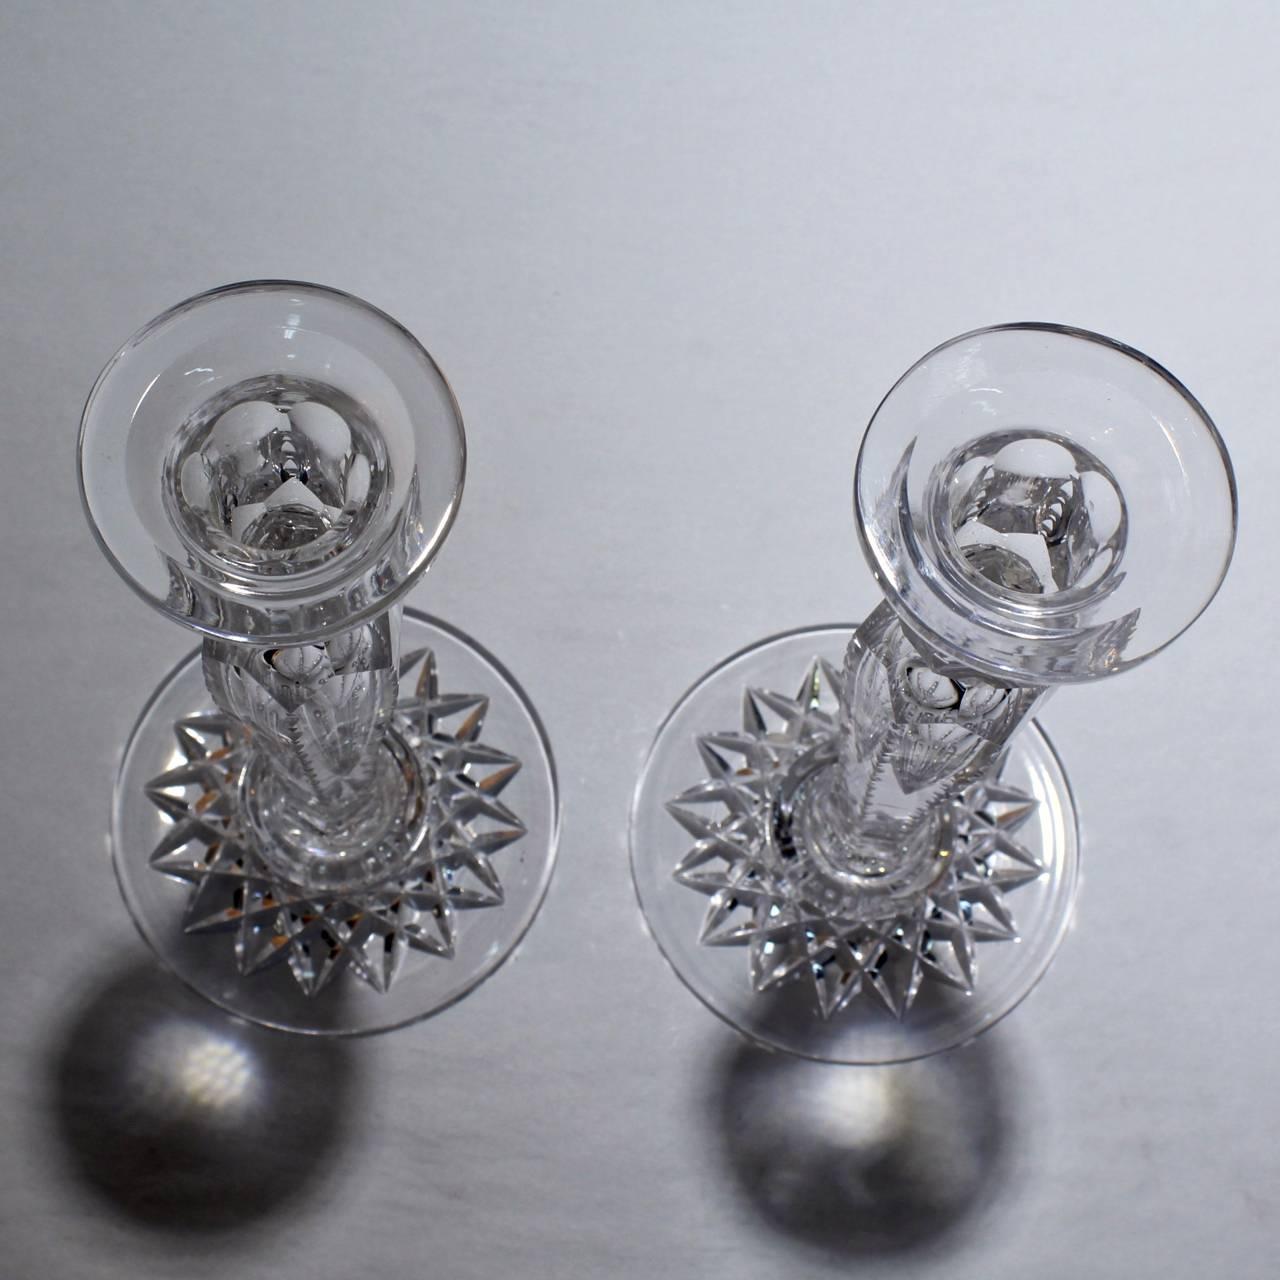 Pair of Fine American Brilliant Period Cut Glass Candlesticks or Candleholders 4